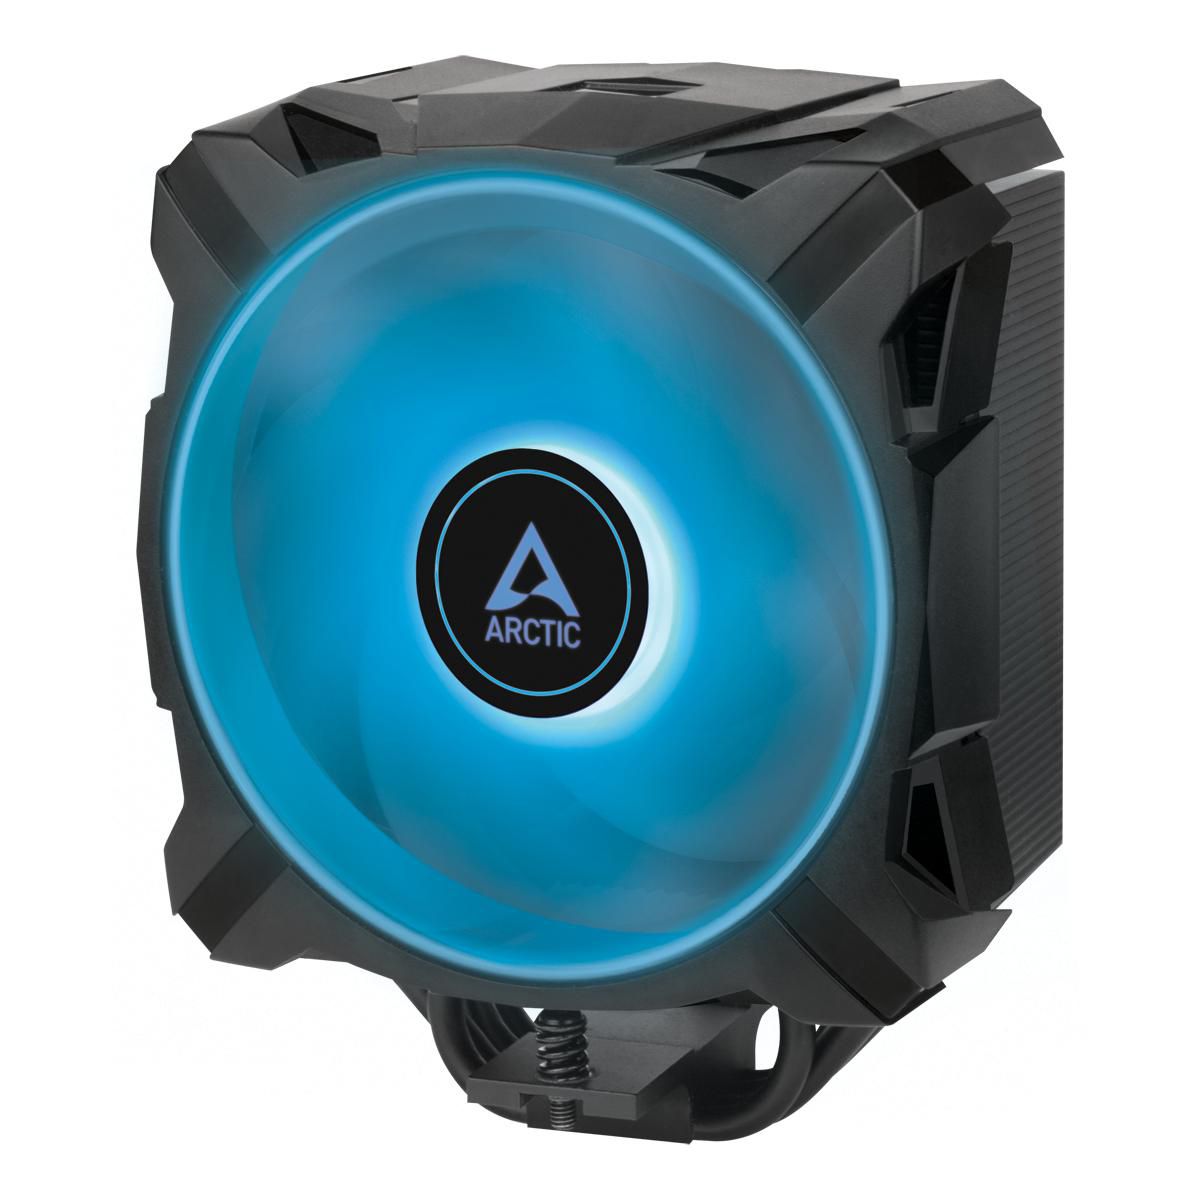 Arctic ACFRE00114A W128269764 Freezer A35 Rgb - Tower Cpu 